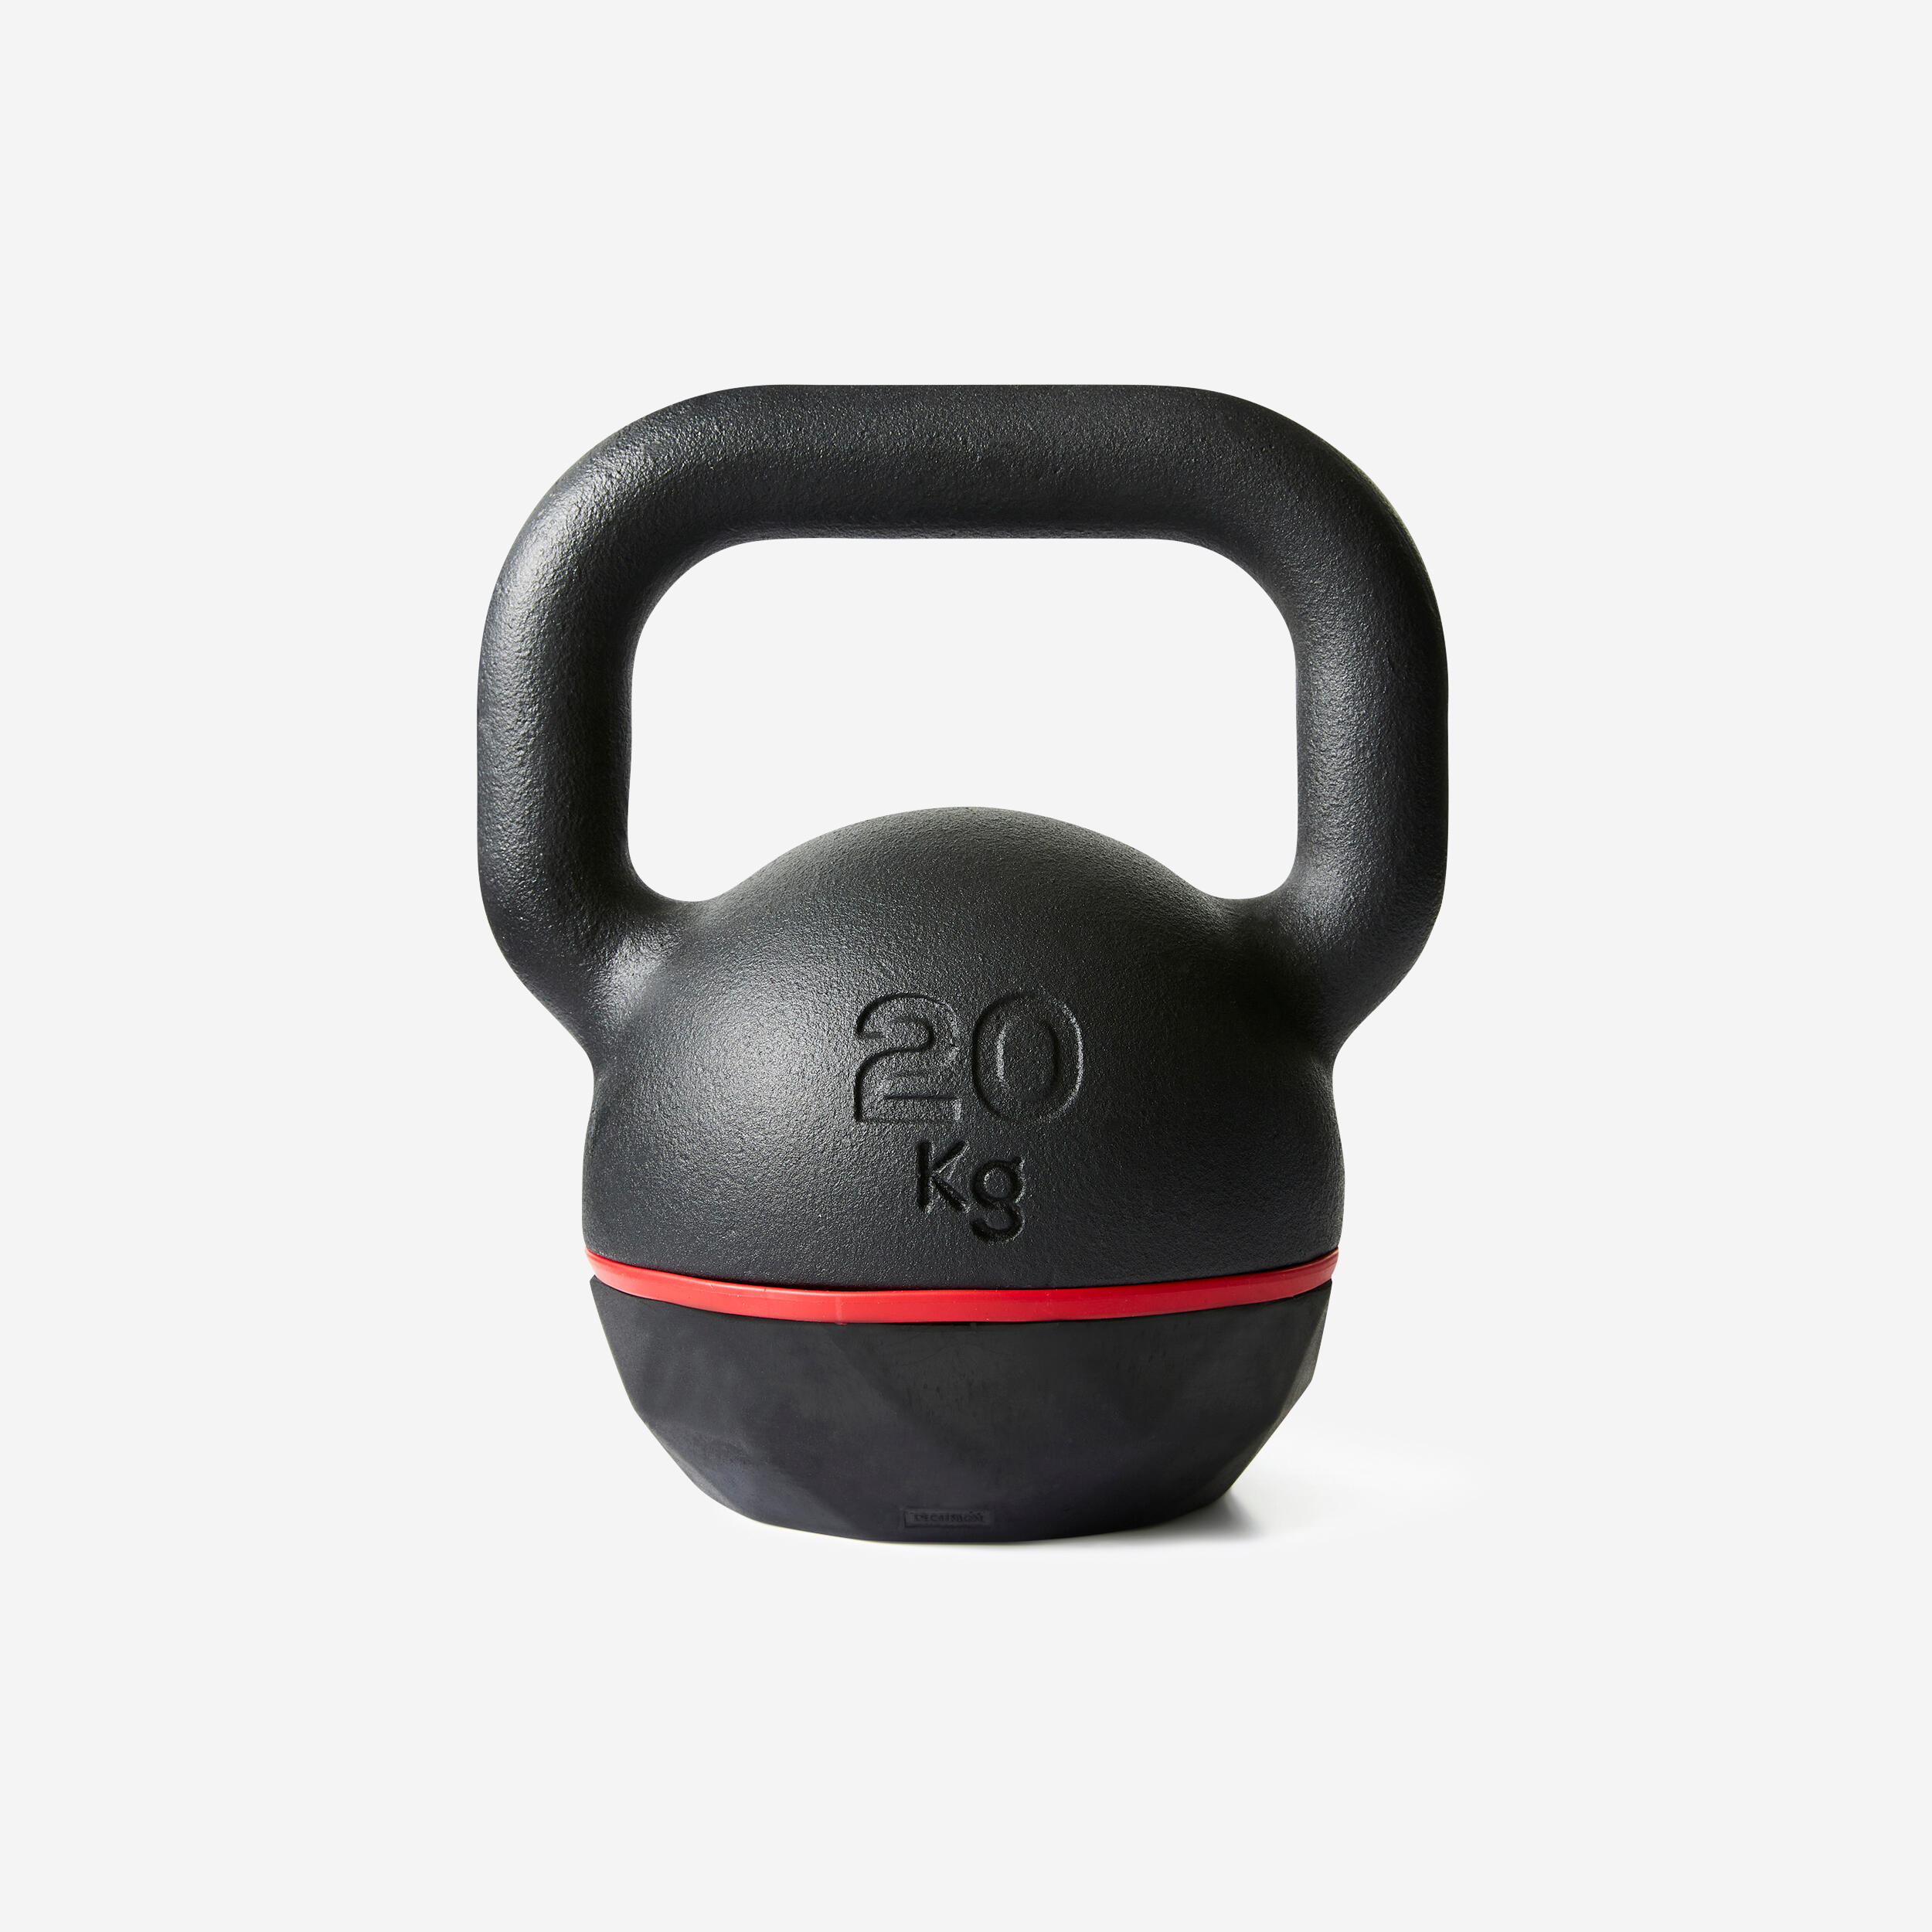 Cast Iron Kettlebell with Rubber Base - 20 kg 1/9